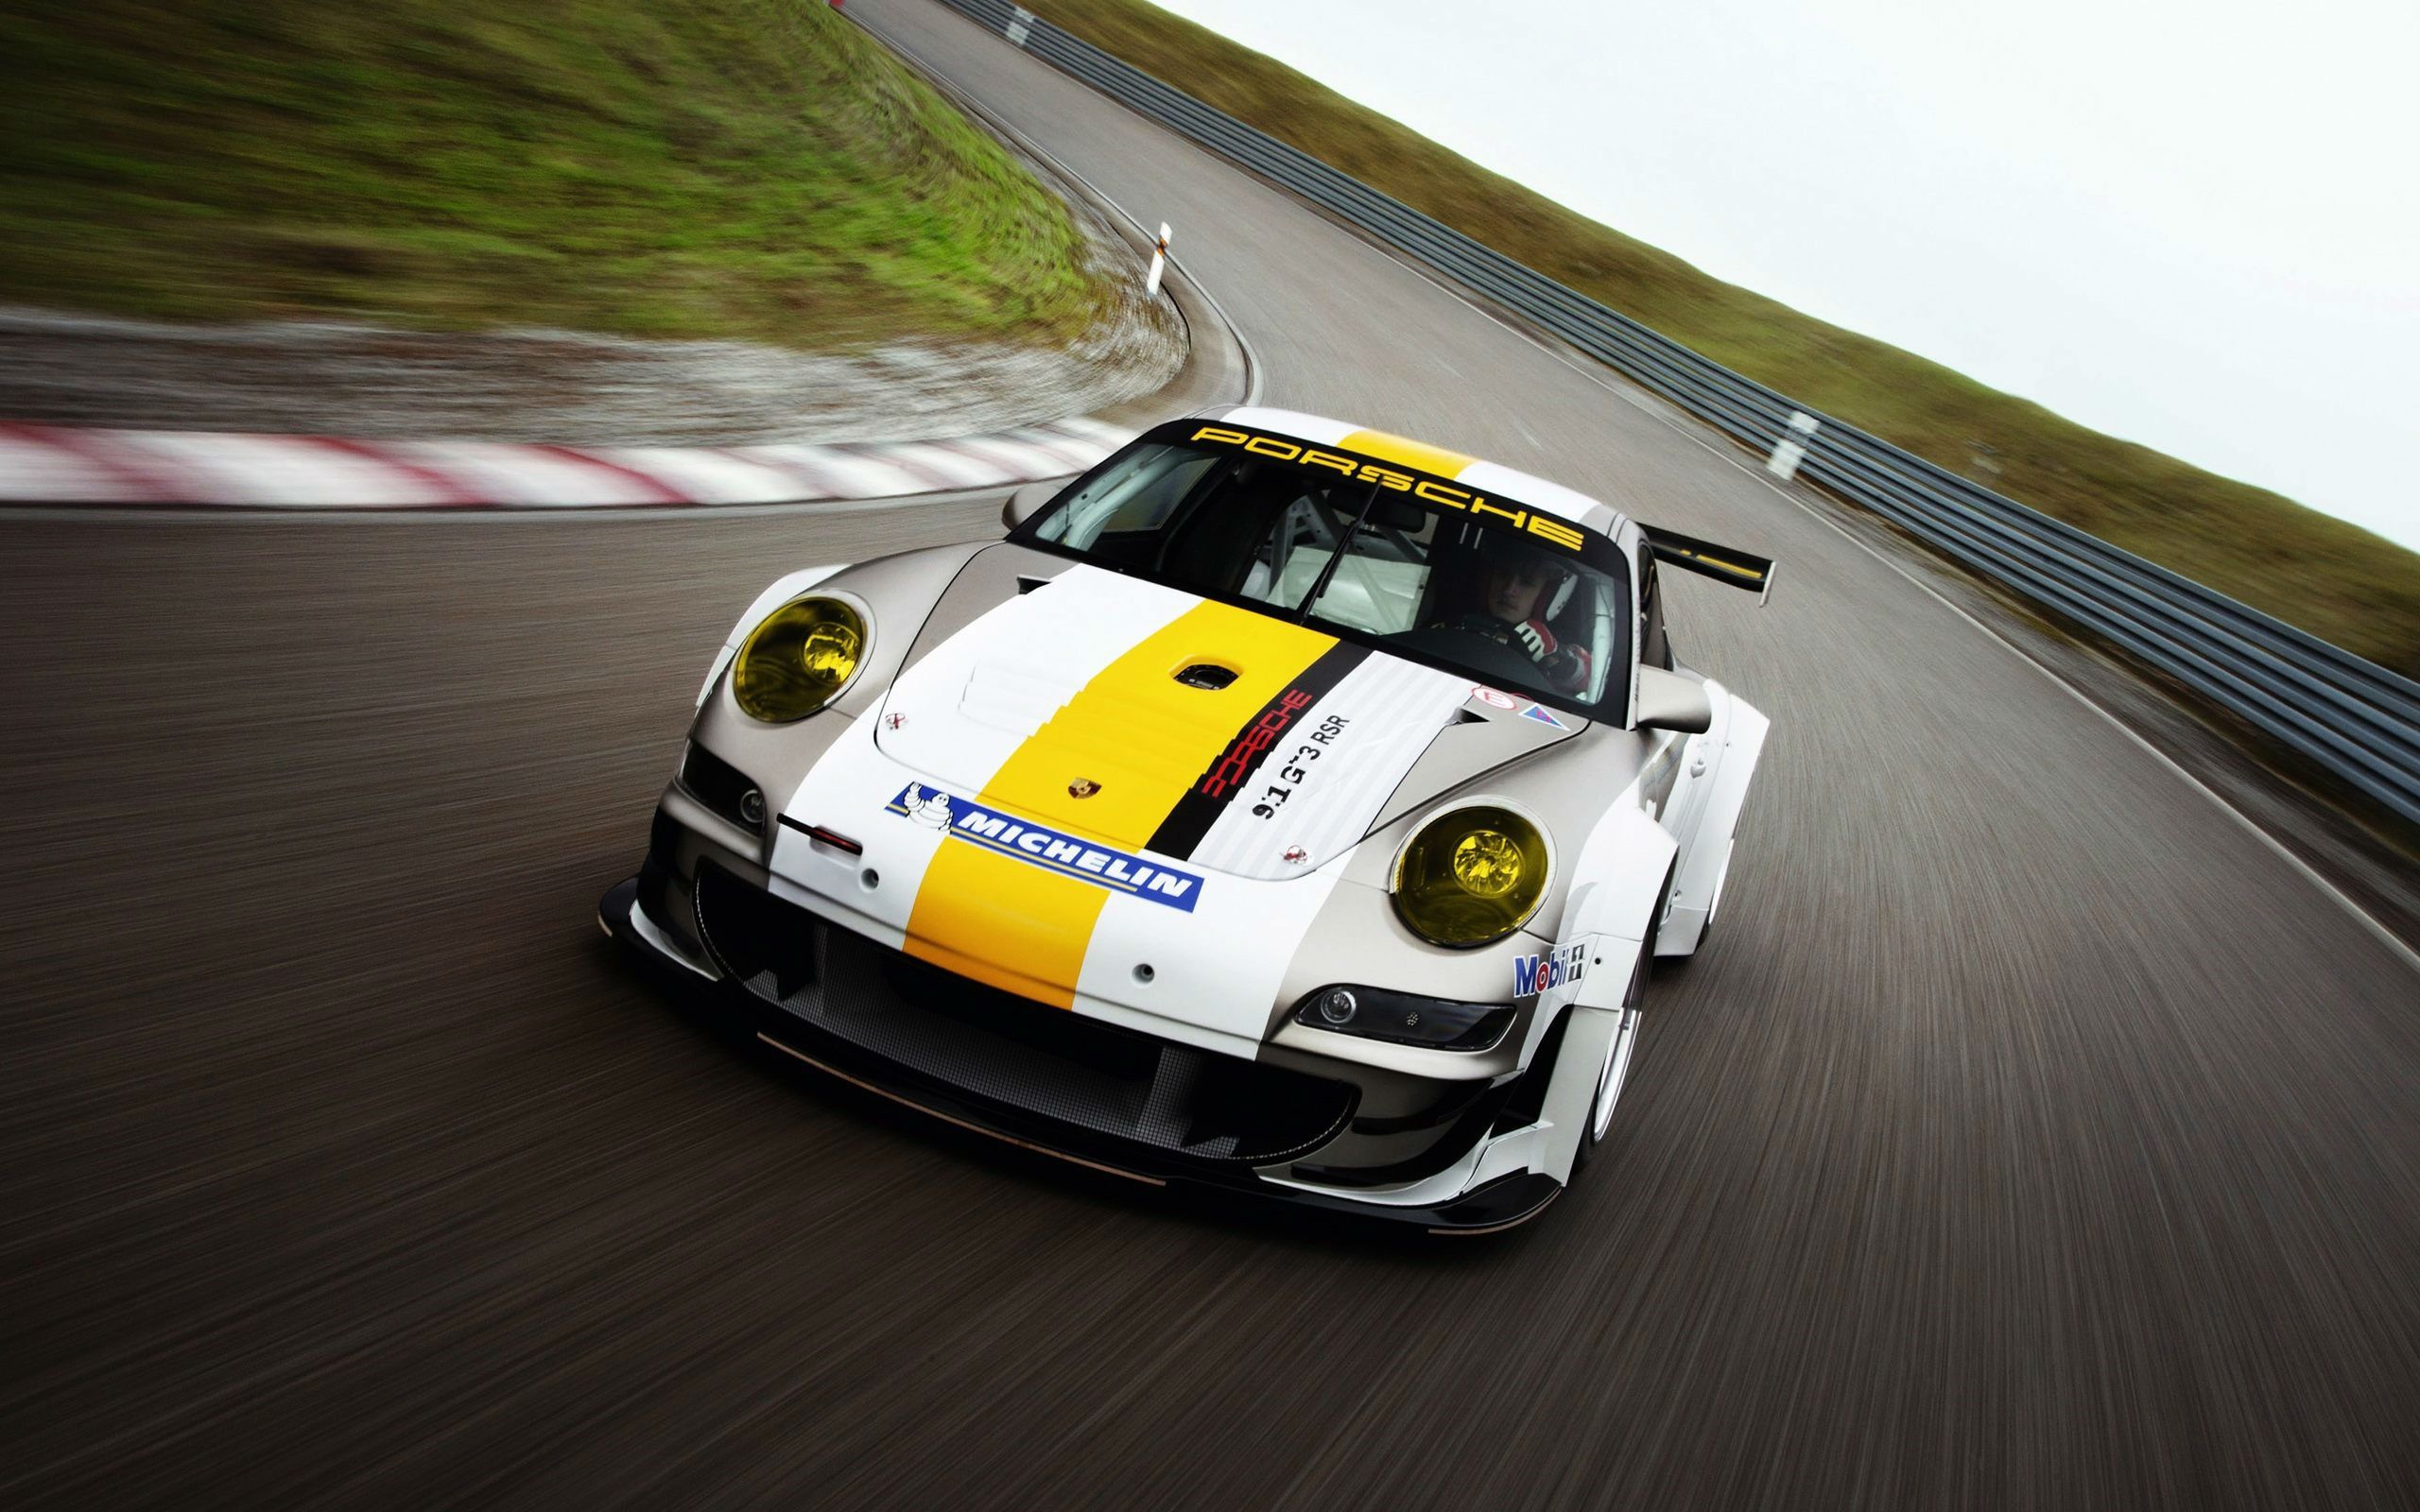 2560x1600 Porsche 911 Track Racing Hd Cars 4k Wallpaper Image Background Photo And Picture